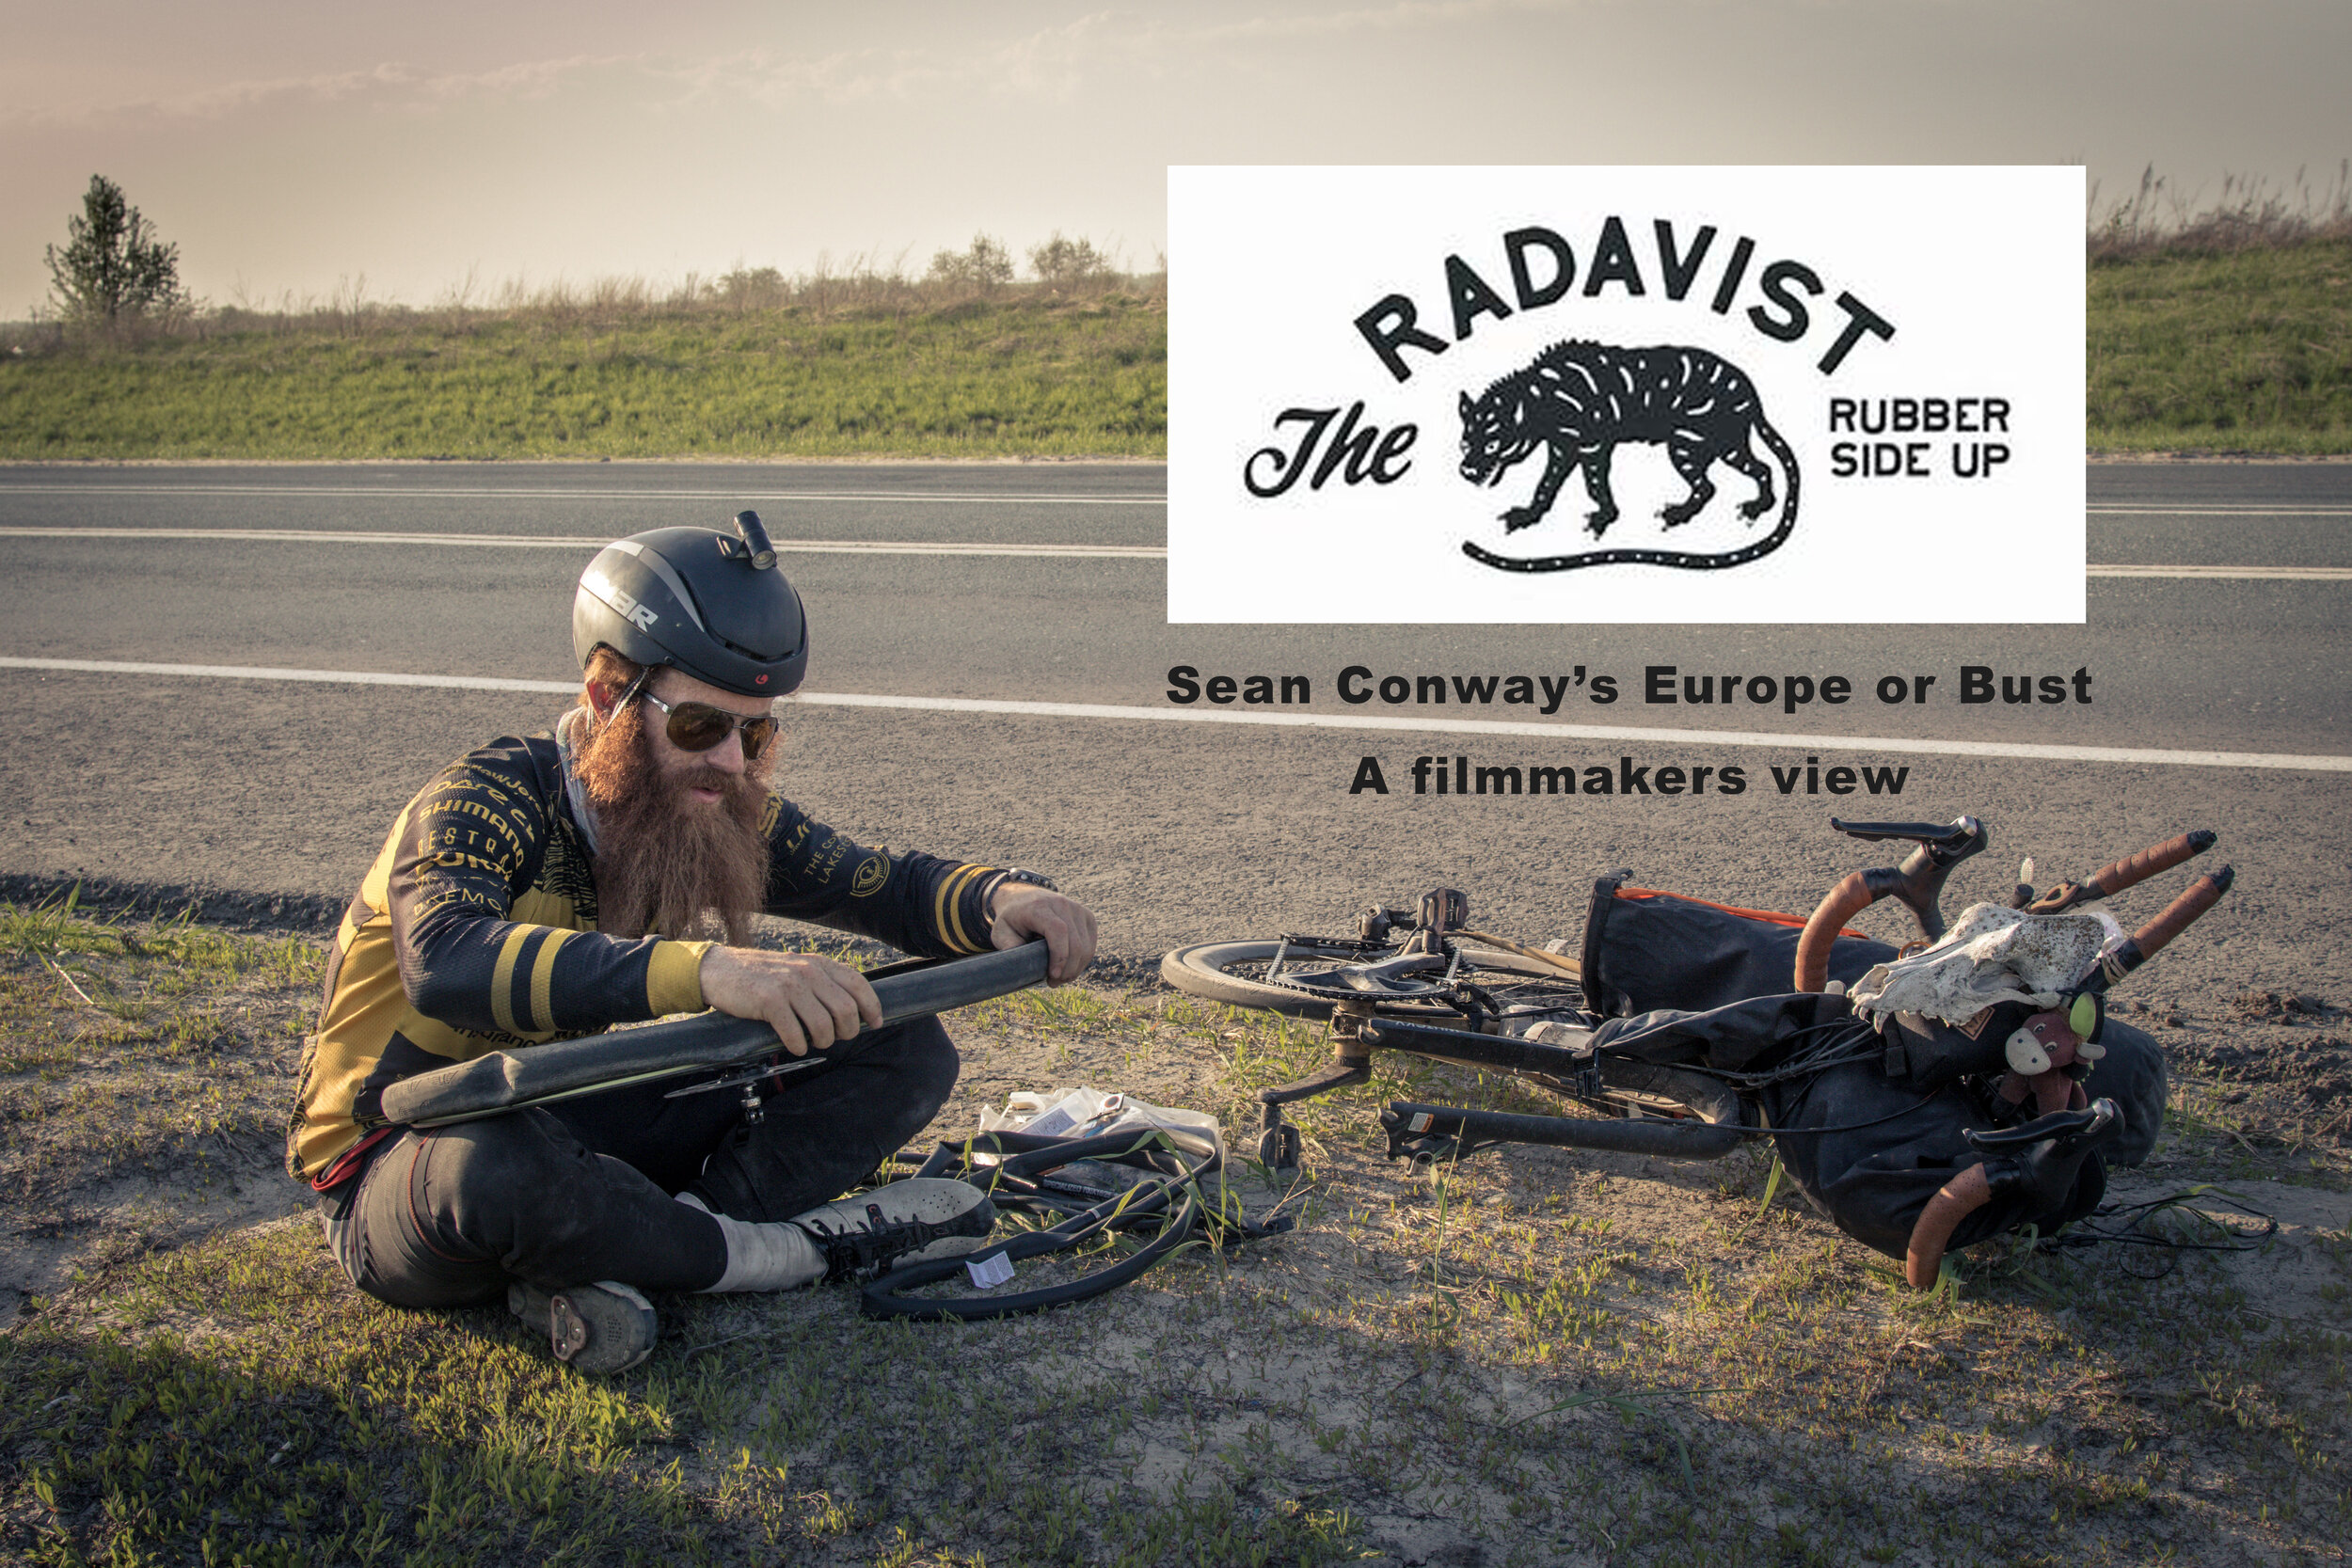 Sean Conway’s Europe cycle record - A filmmakers view.